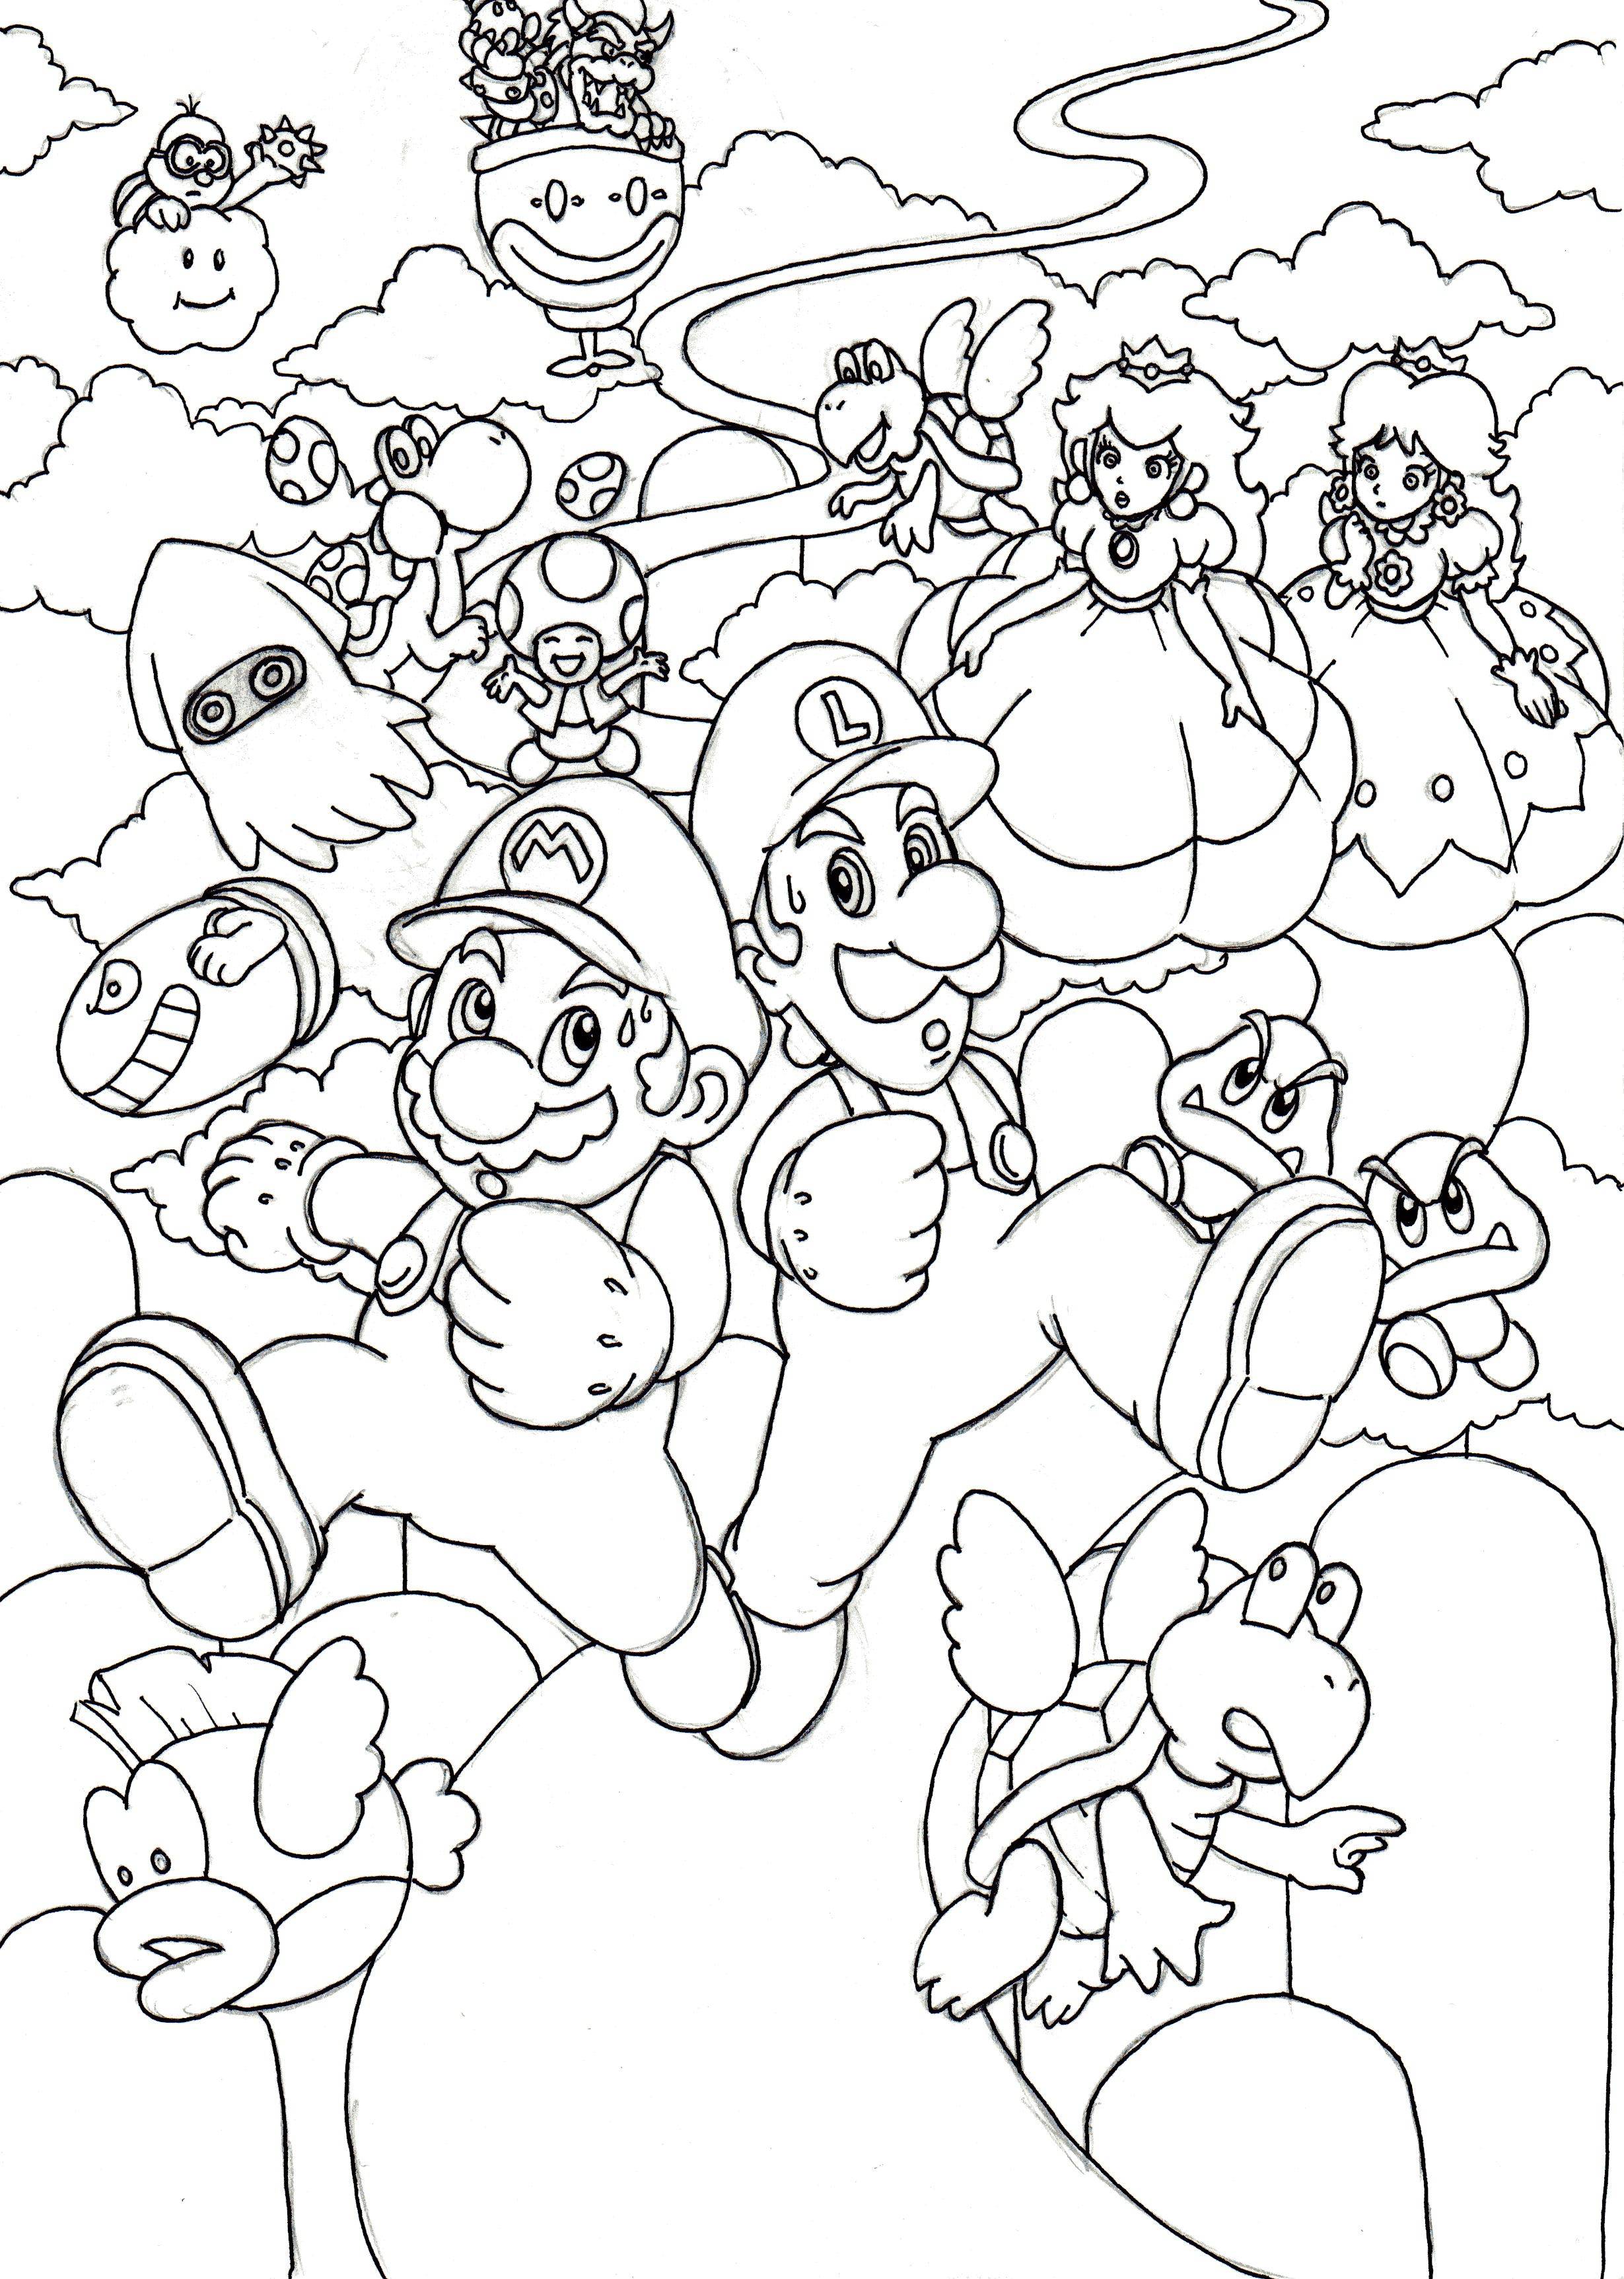 Super Mario 3D World Coloring Pages - Coloring Home